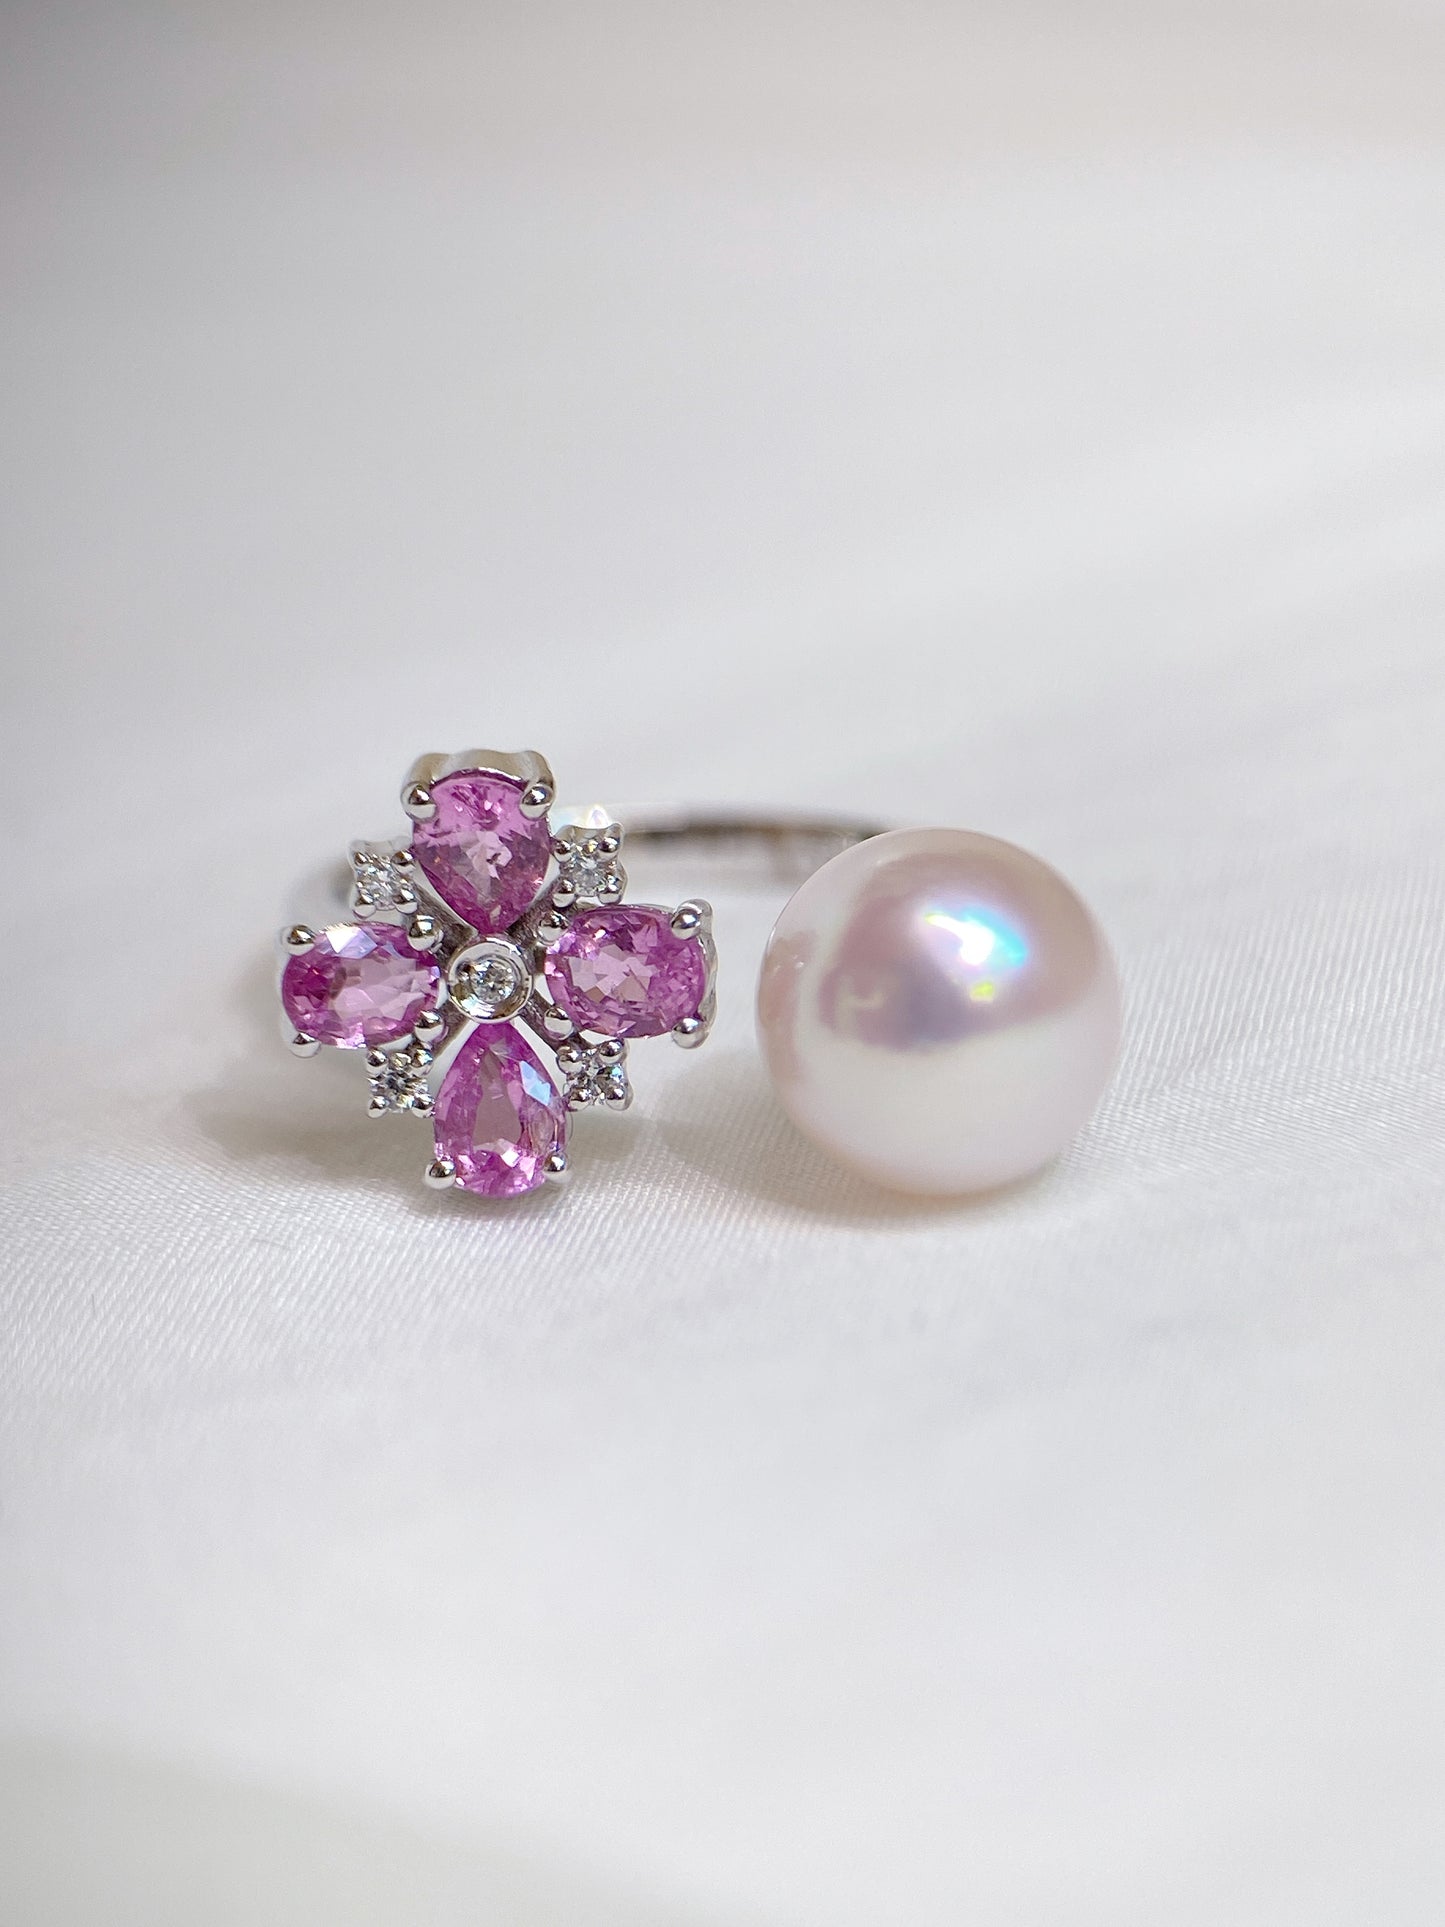 Akoya Pearl and Pink Sapphire Ring in 18K White Gold with Diamond, ps0.7ct,d0.045ct,8-8.5mm